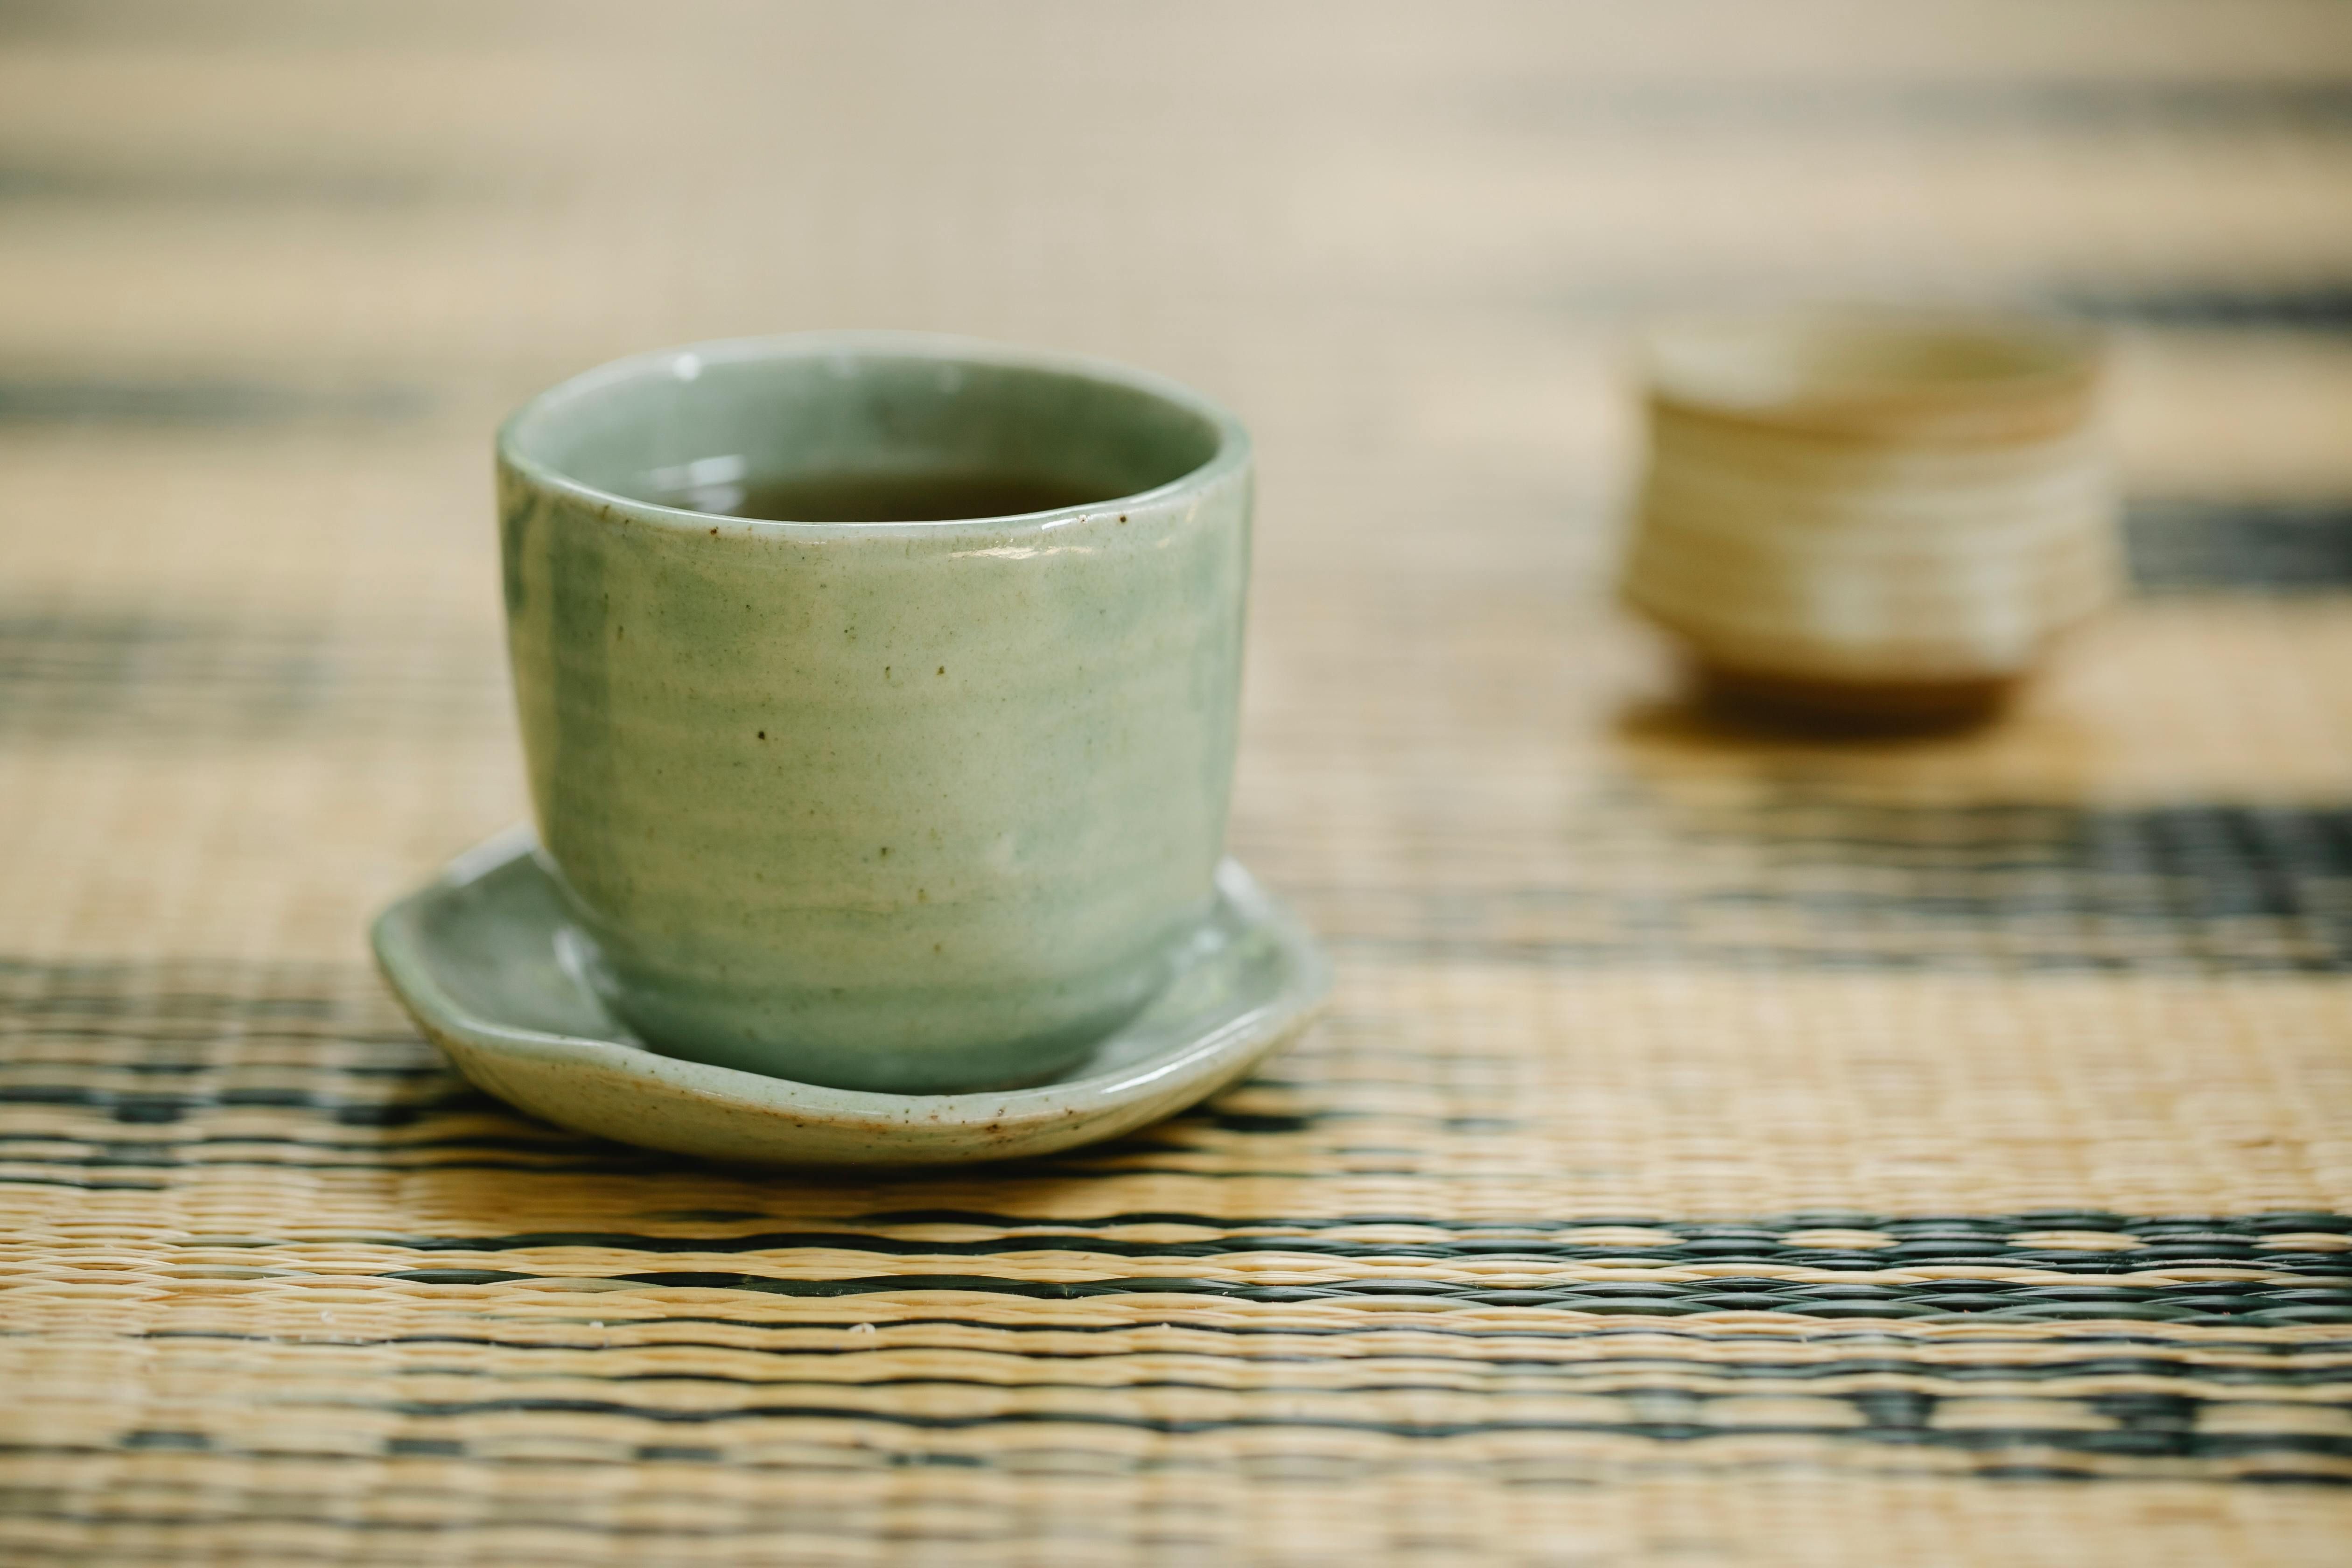 A elegant ceramic teacup filled with fresh, rich black tea sitting on a rustic wooden surface - the perfect morning ritual while intermittent fasting